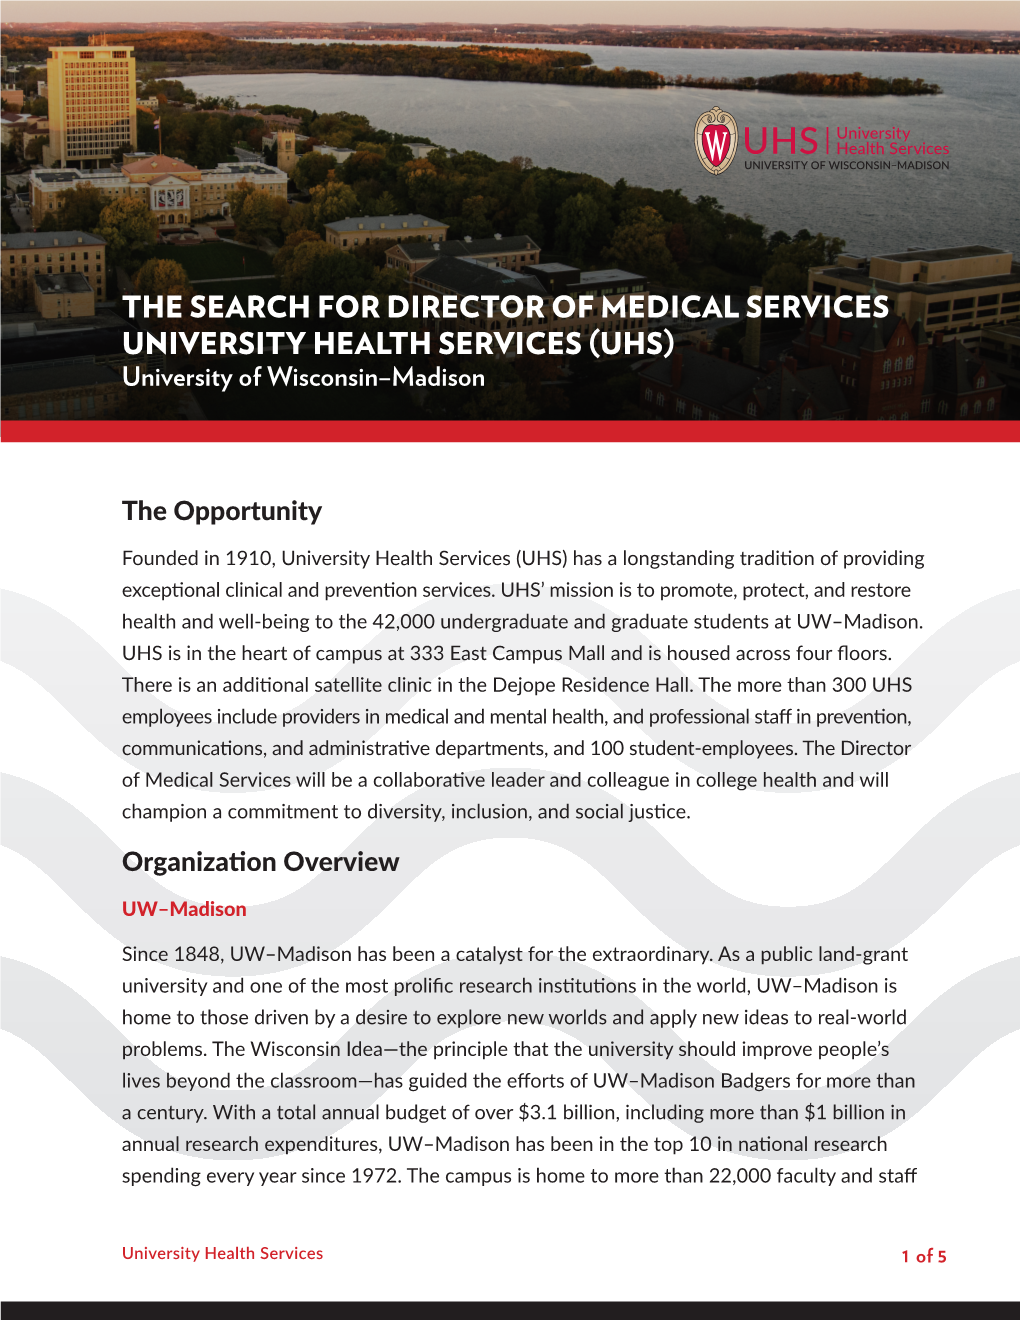 “The Search for Director of Medical Services” (PDF)